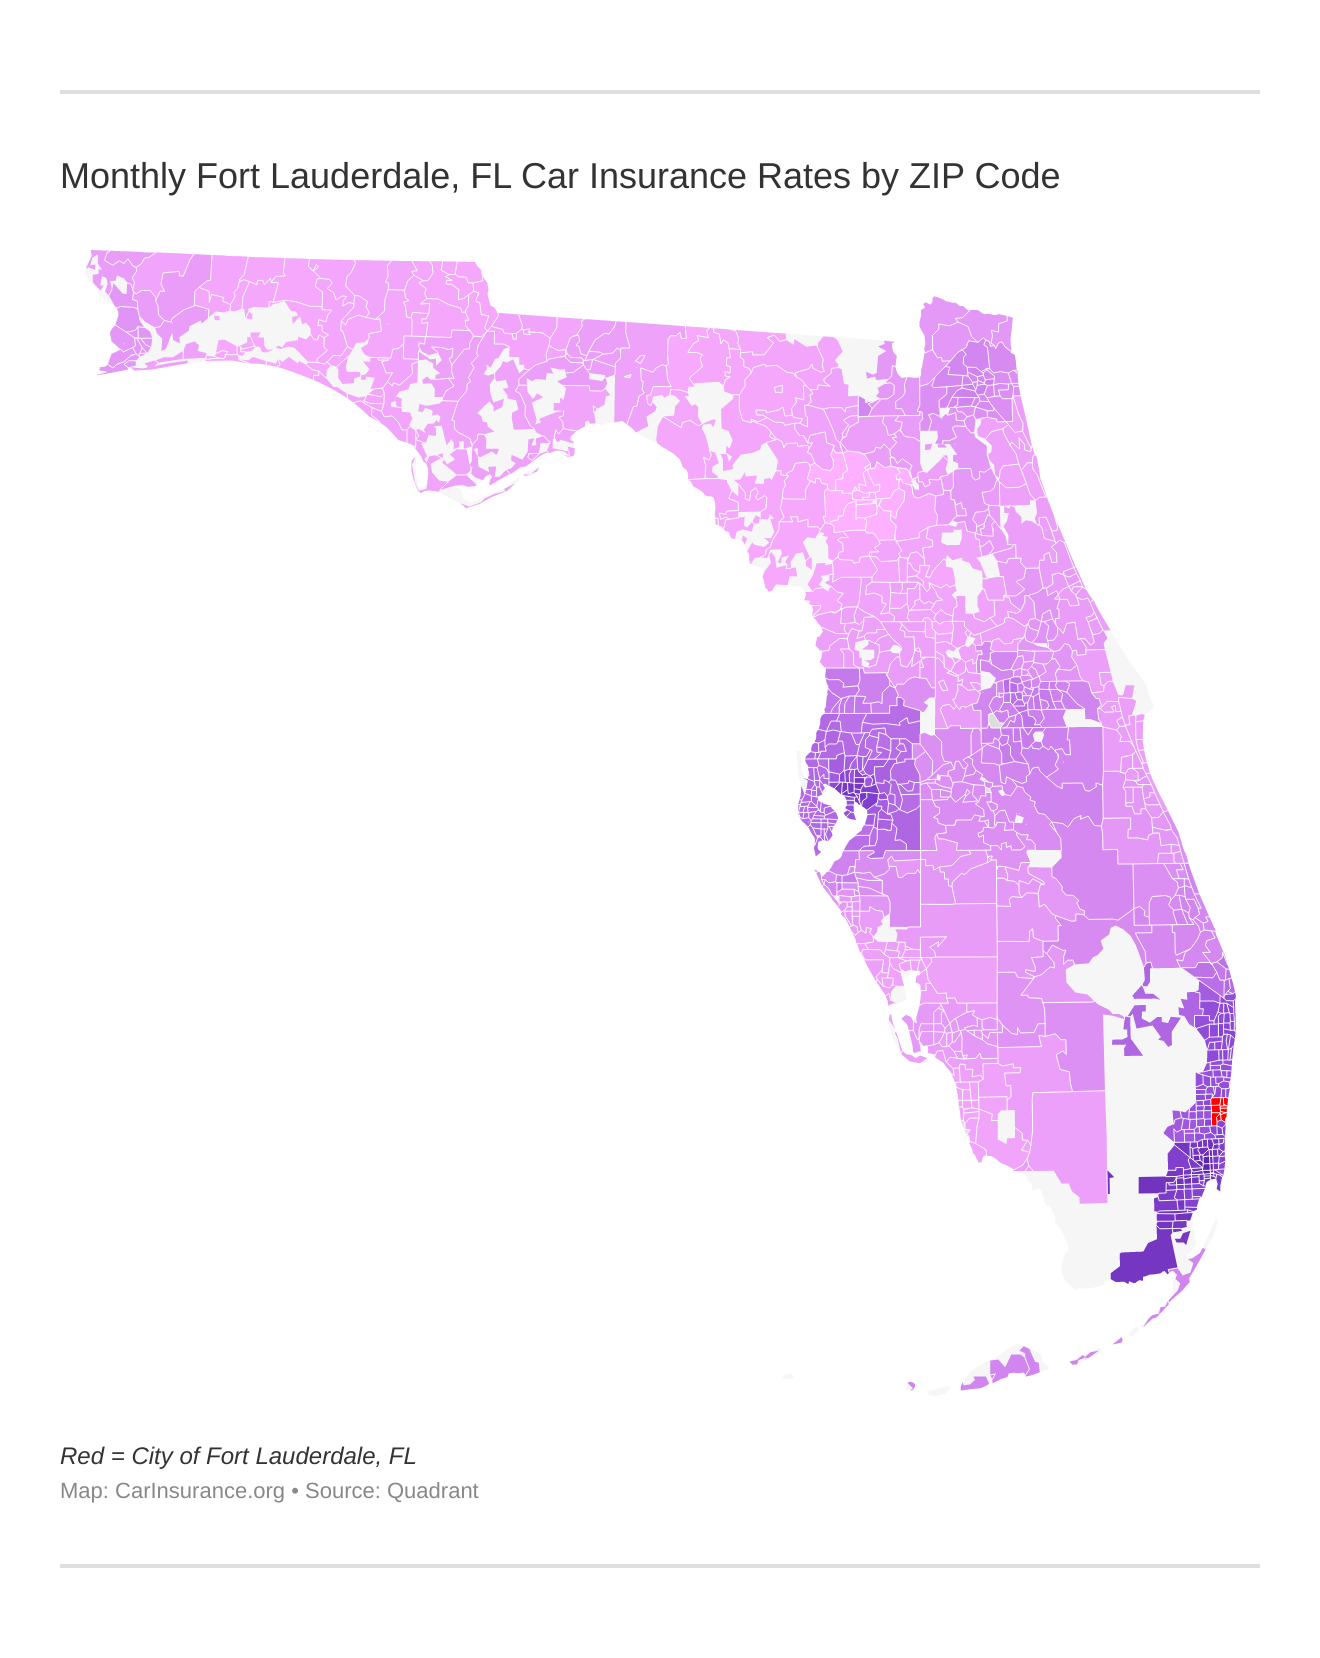 Monthly Fort Lauderdale, FL Car Insurance Rates by ZIP Code